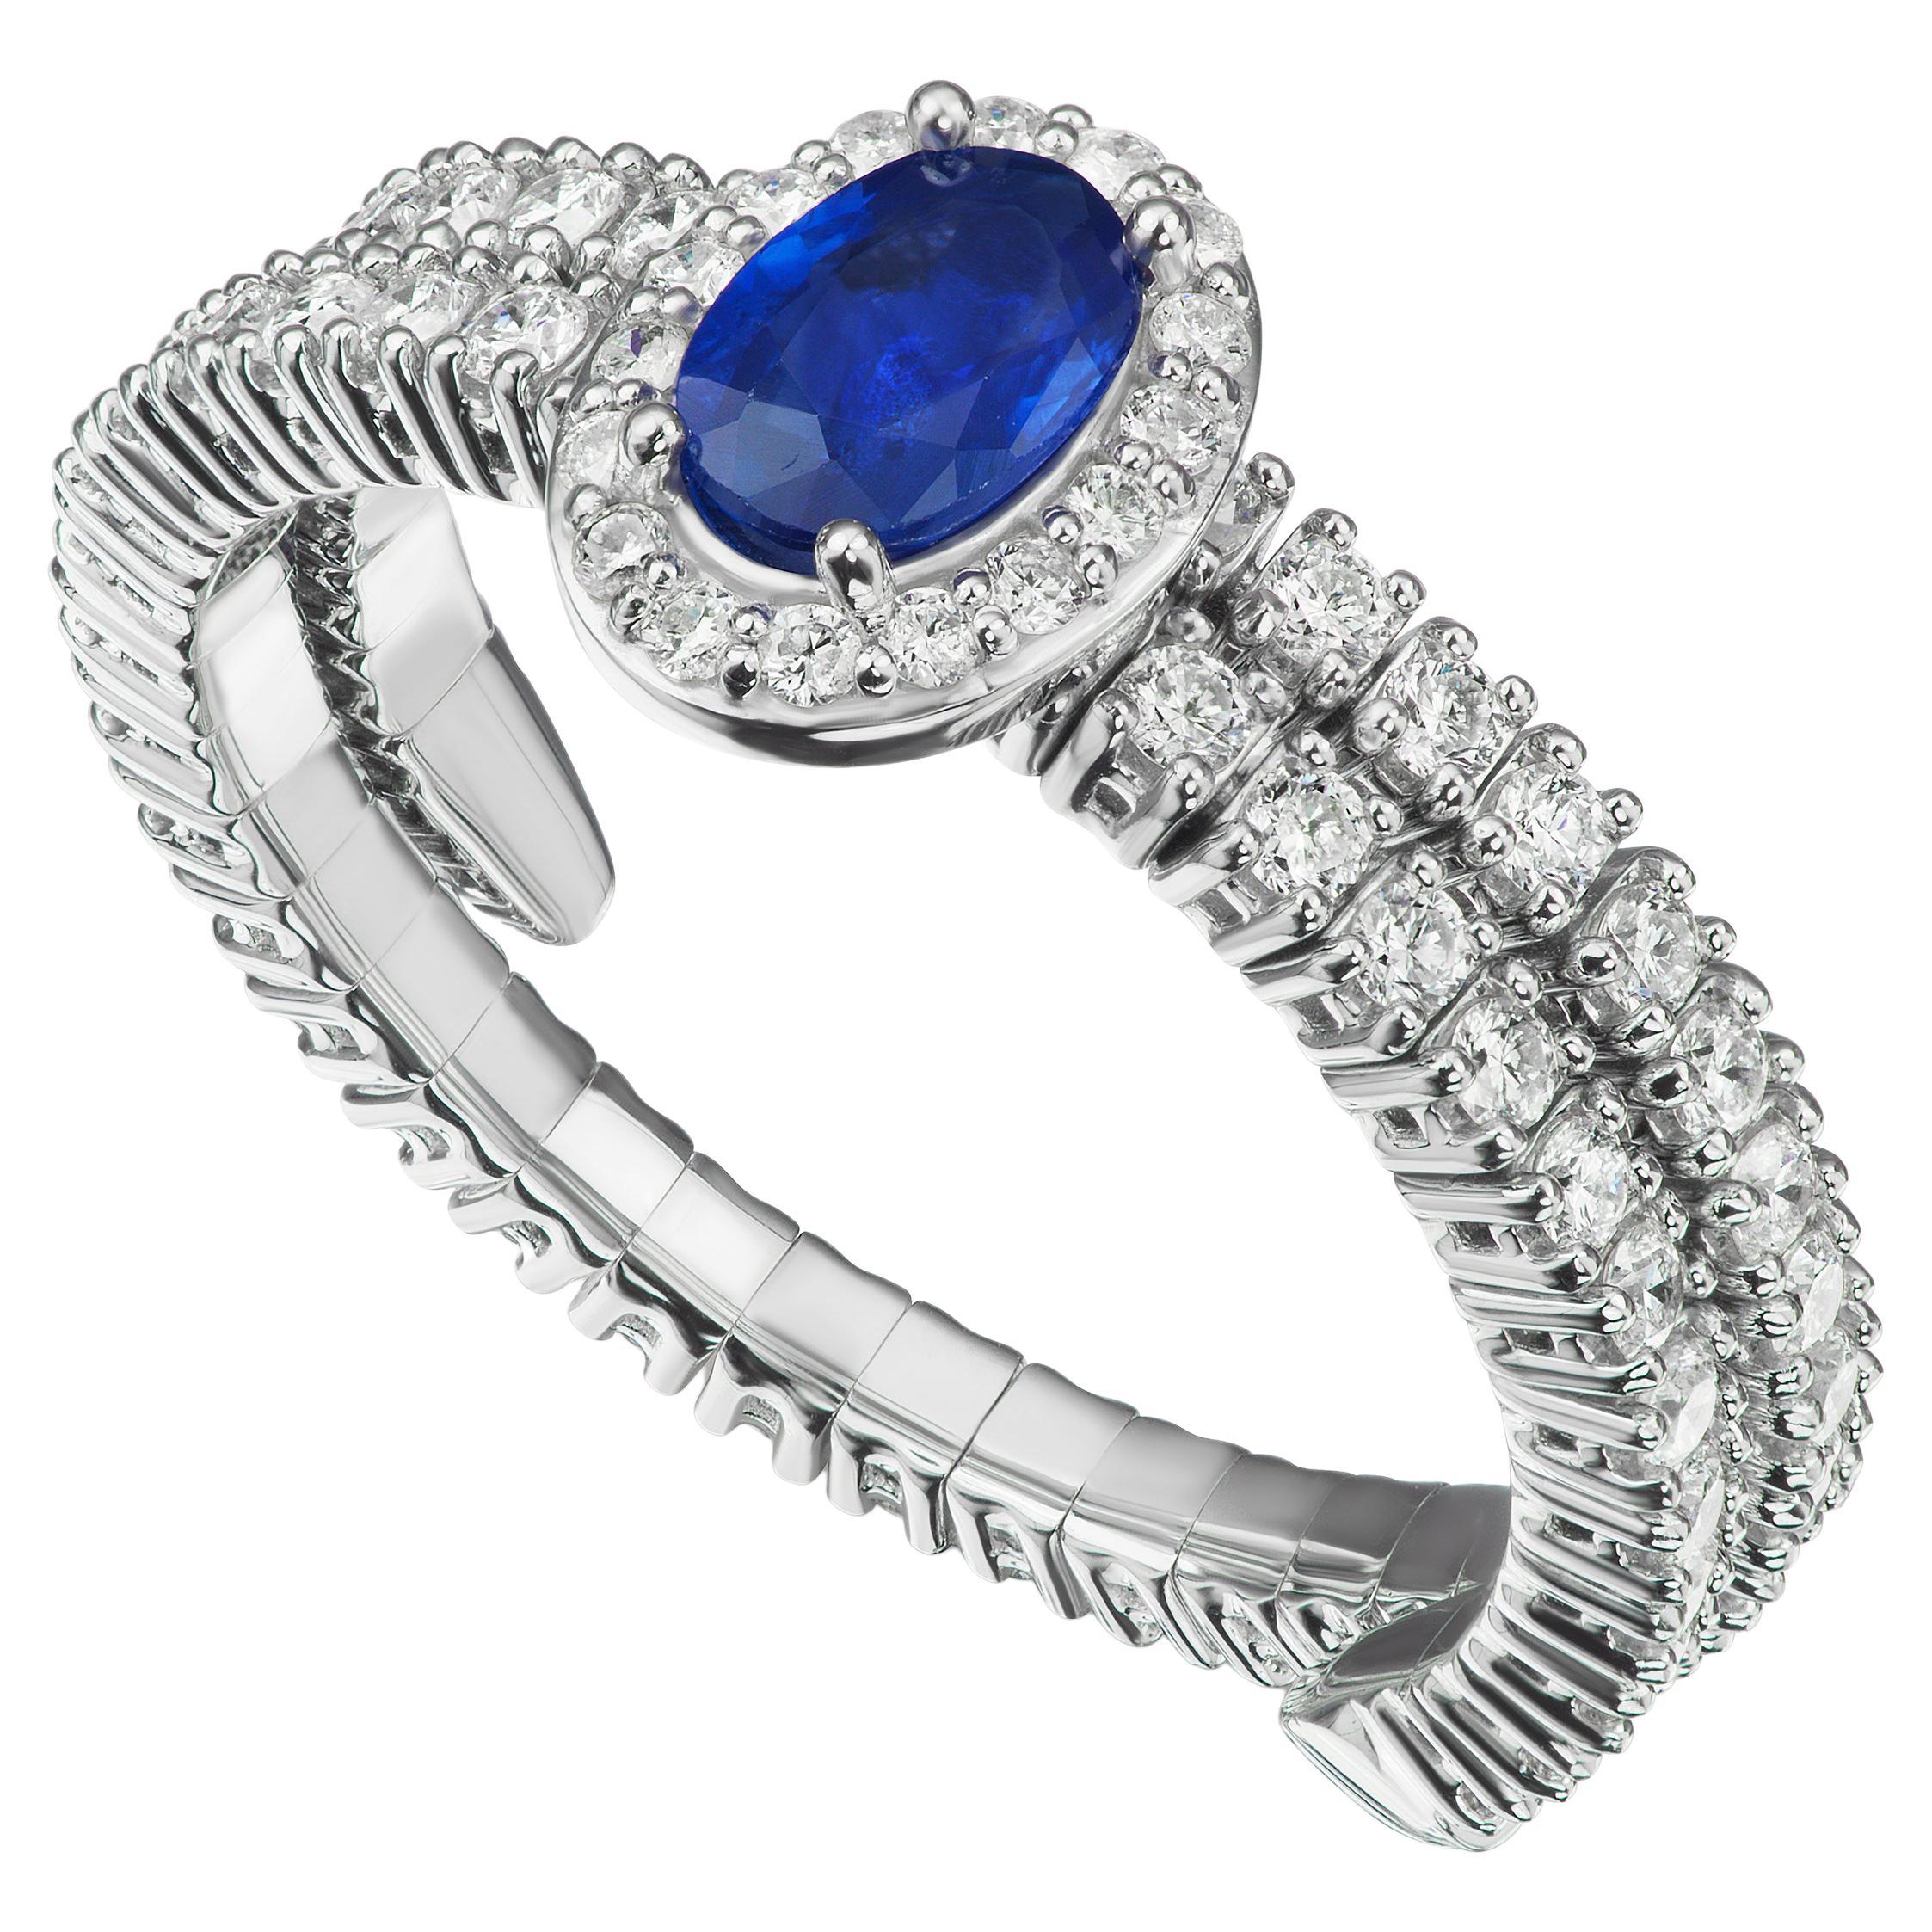 Blue Sapphire and Diamond Adjustable Band Ring in 18k White Gold